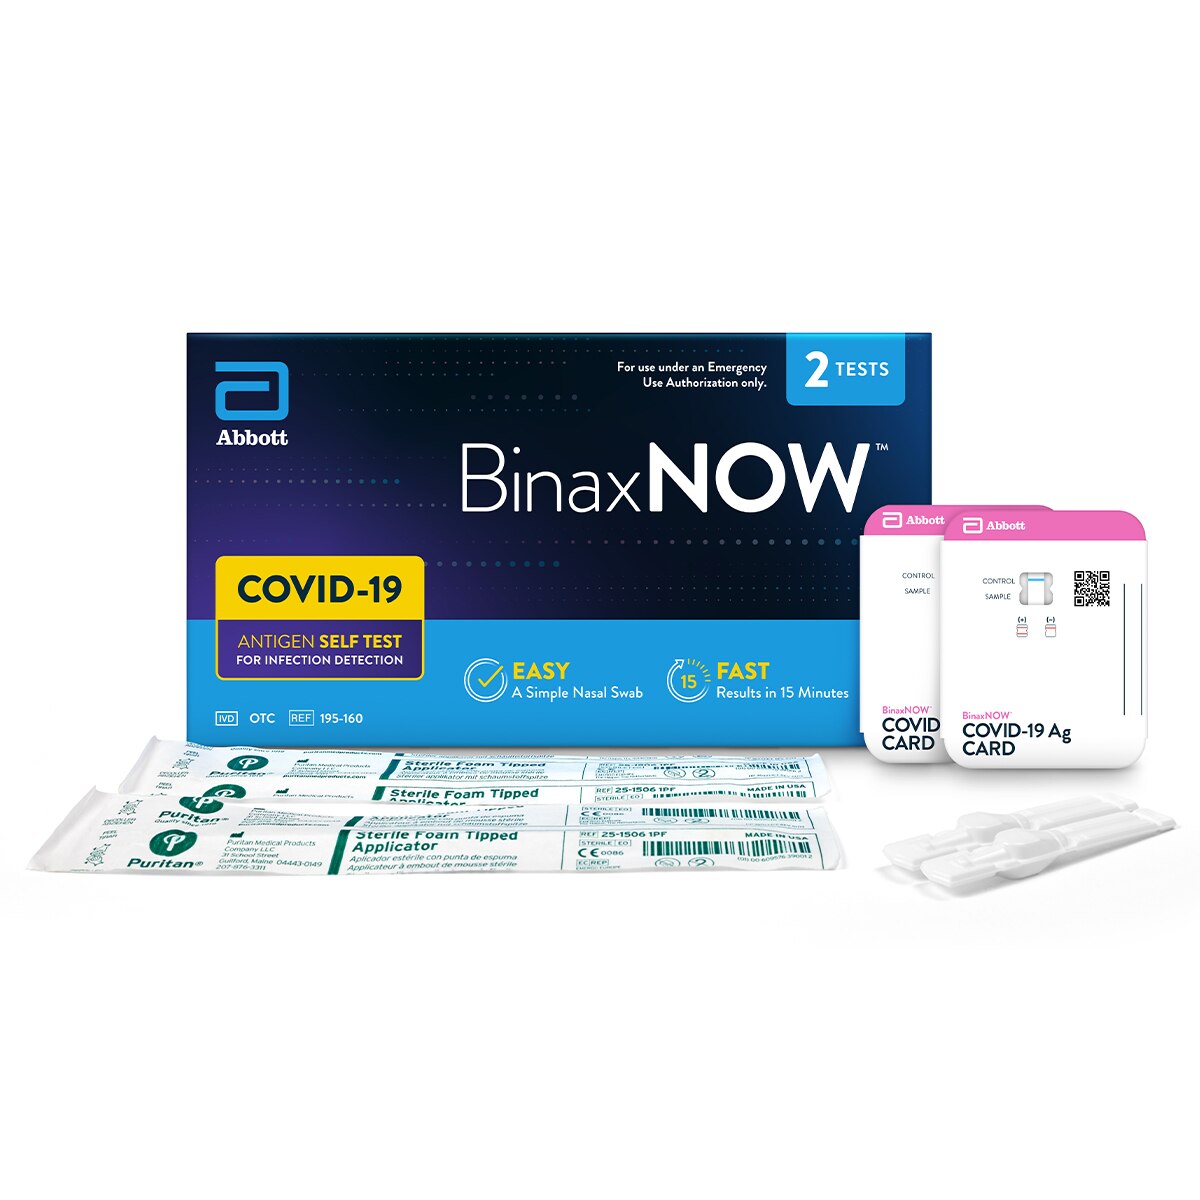 Abbott BinaxNOW™ COVID-19 Ag Card Home Test with eMed Telehealth Services -  1 Pack